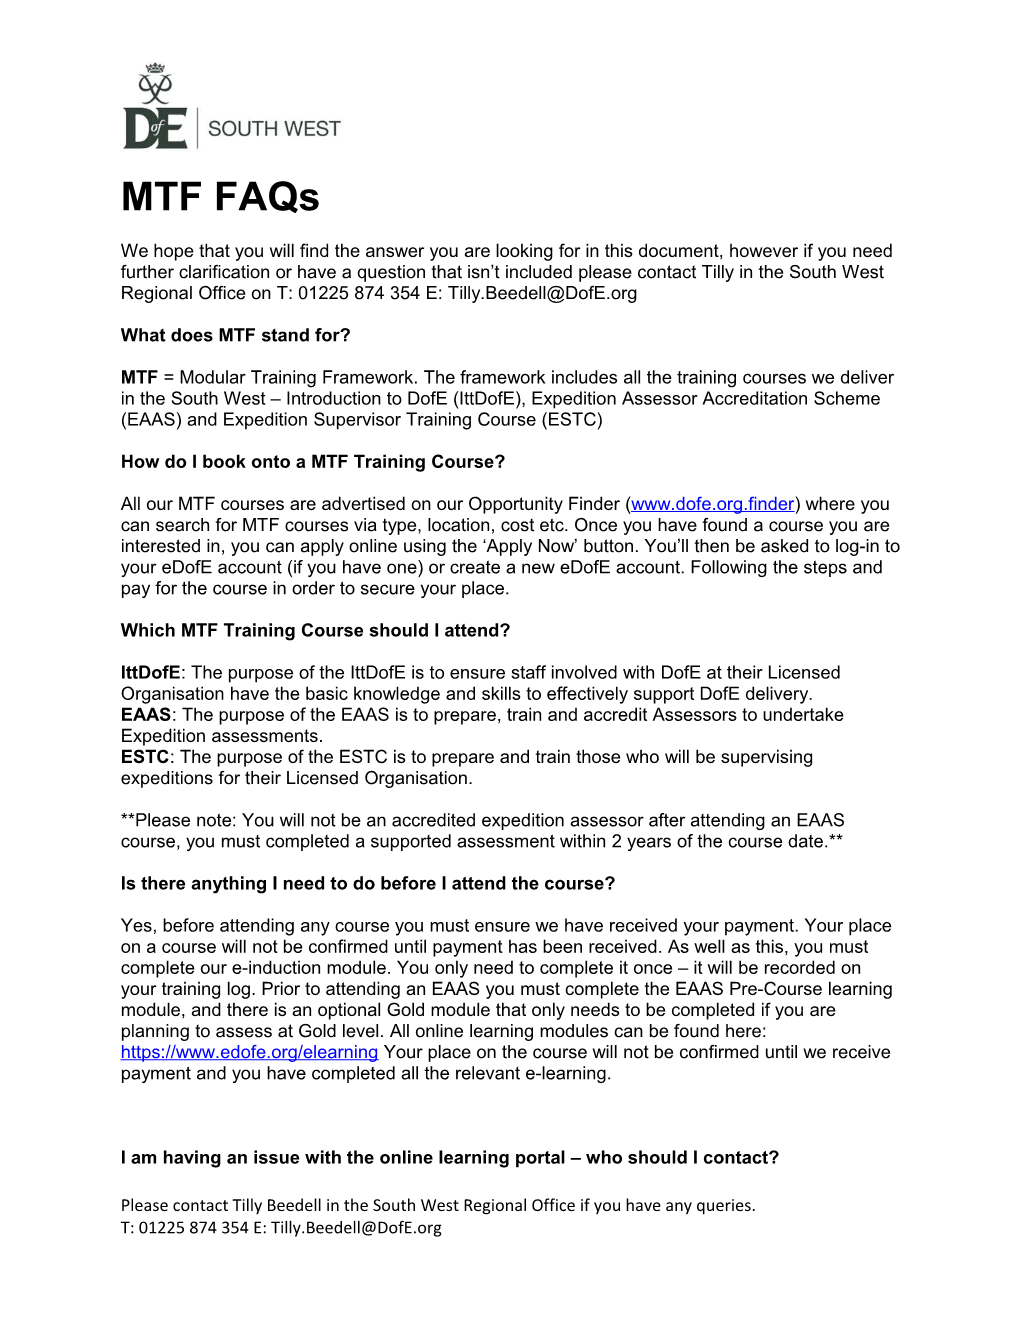 What Does MTF Stand For?